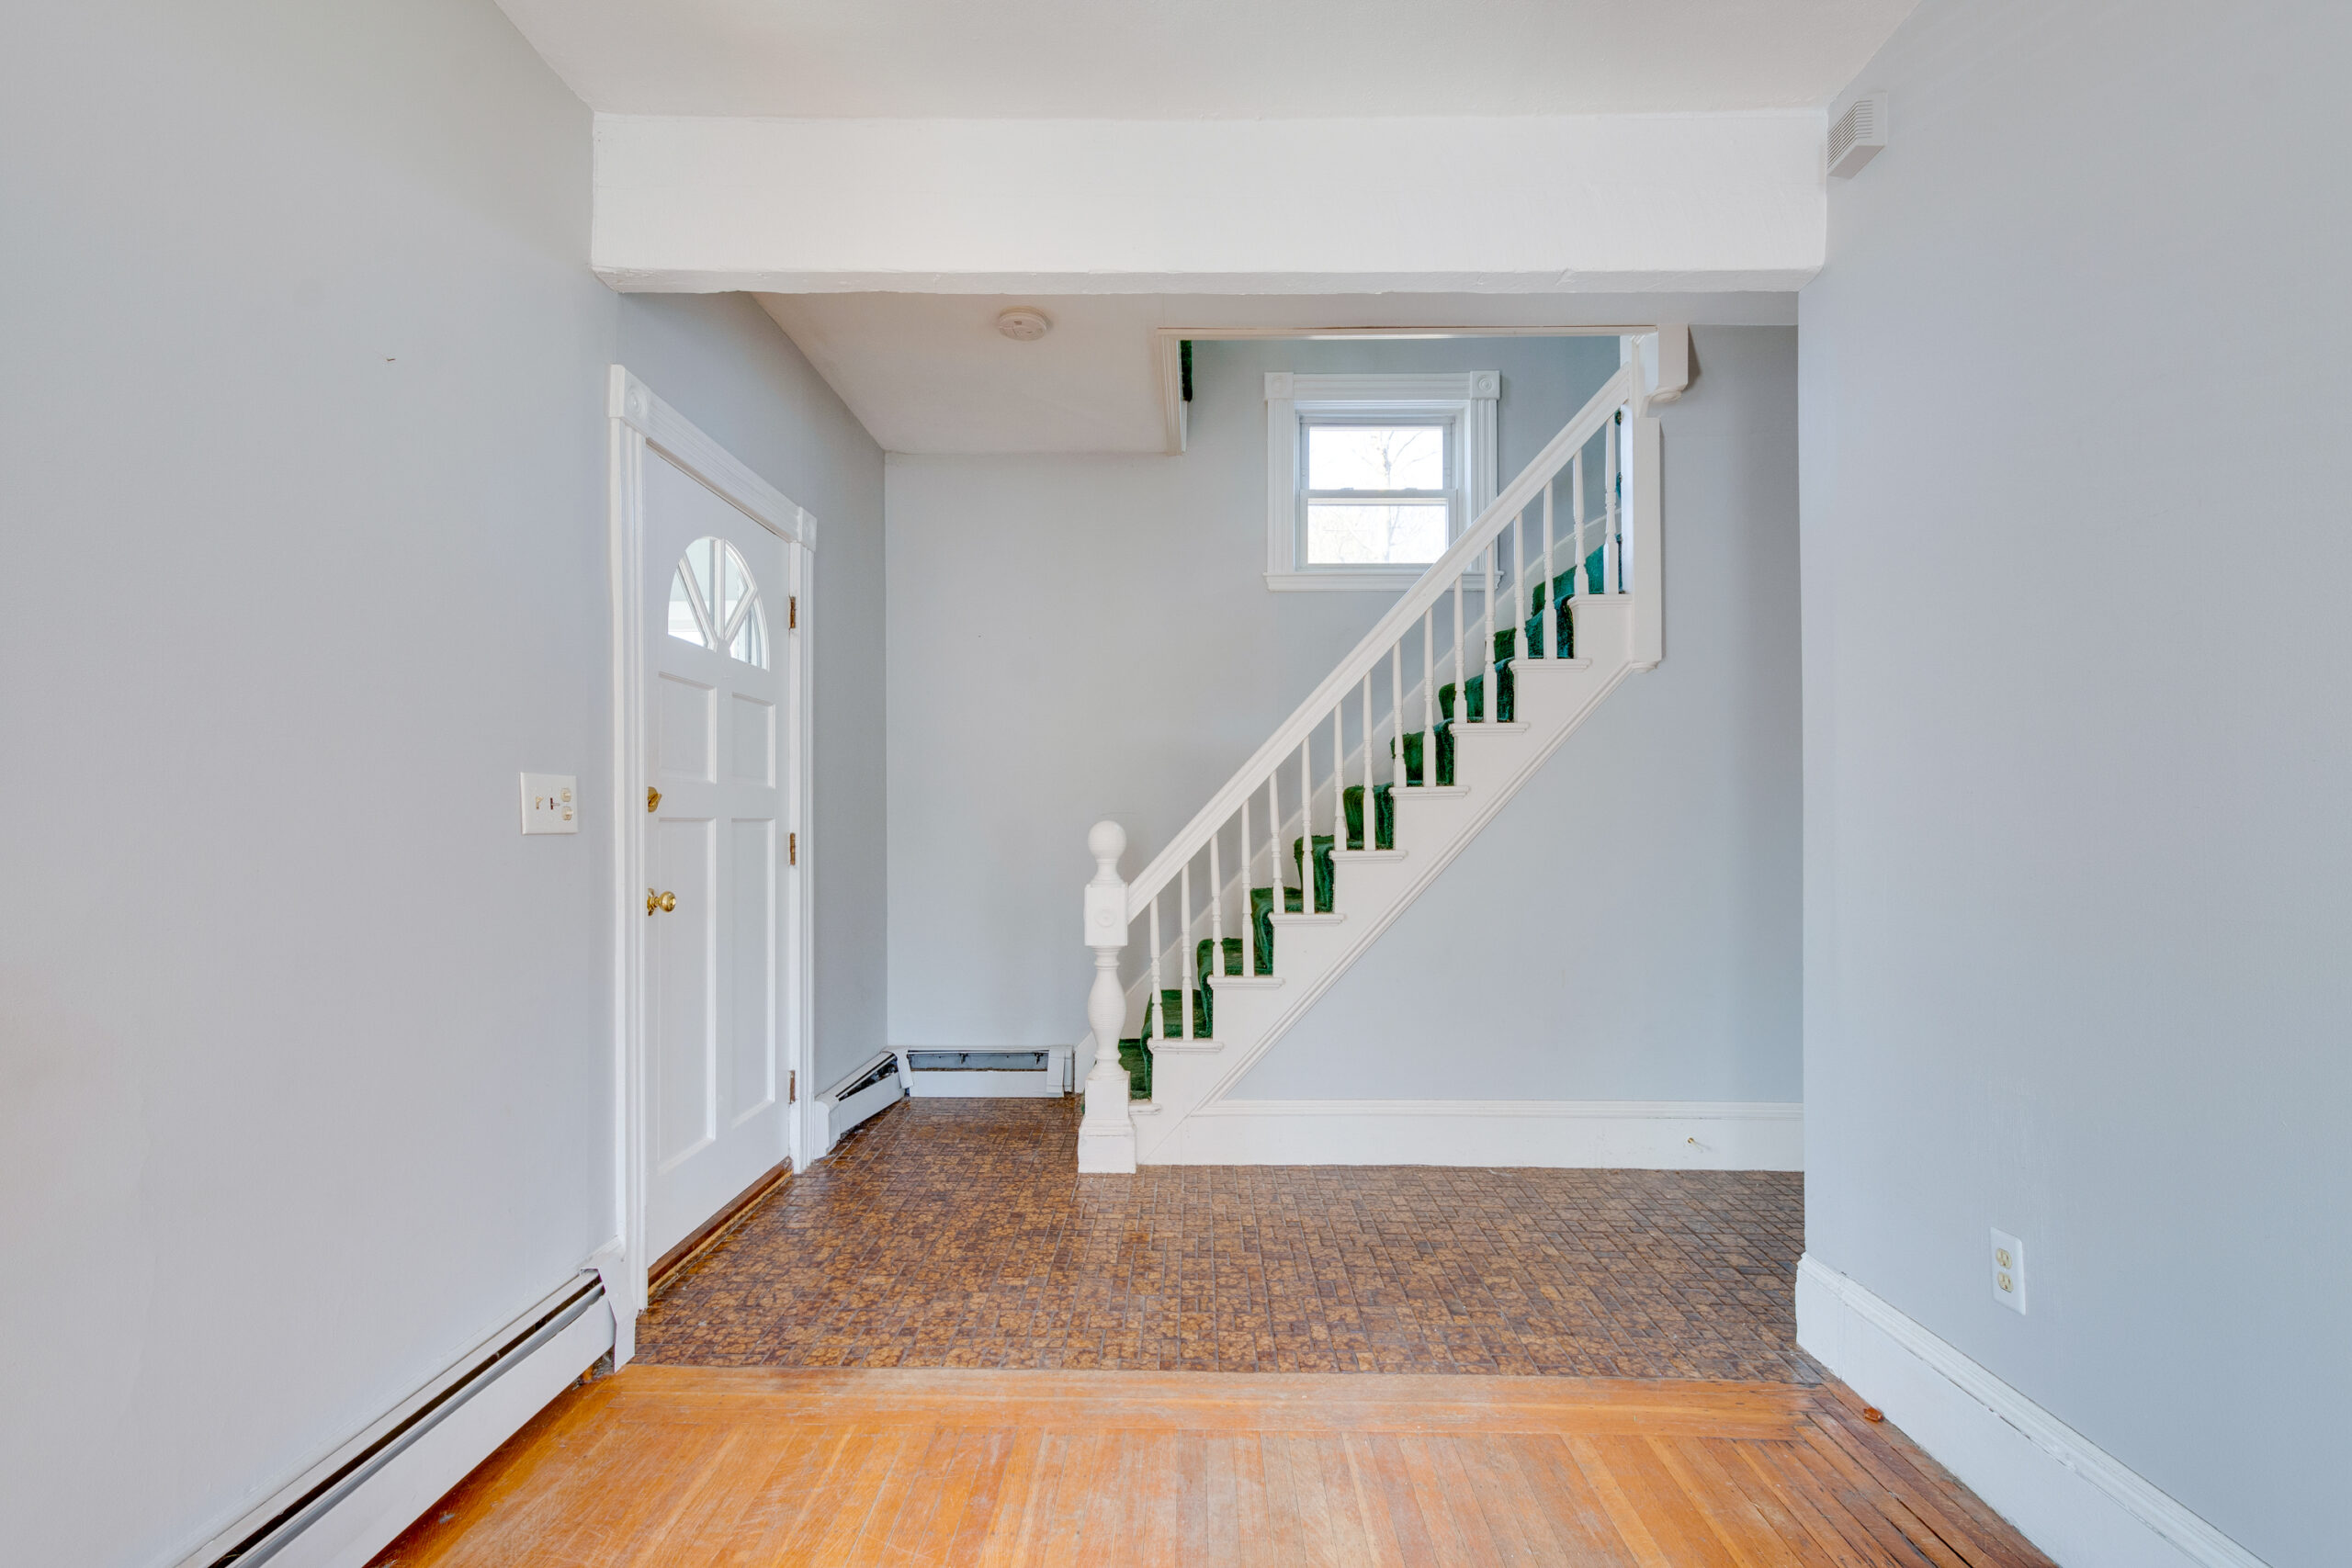 Image of a dated foyer featuring mismatched flooring, dull grey walls, and dark green carpeted stairs. The lighting is inadequate, making the space feel cramped and uninviting. Historic home over 100 years old in New England.